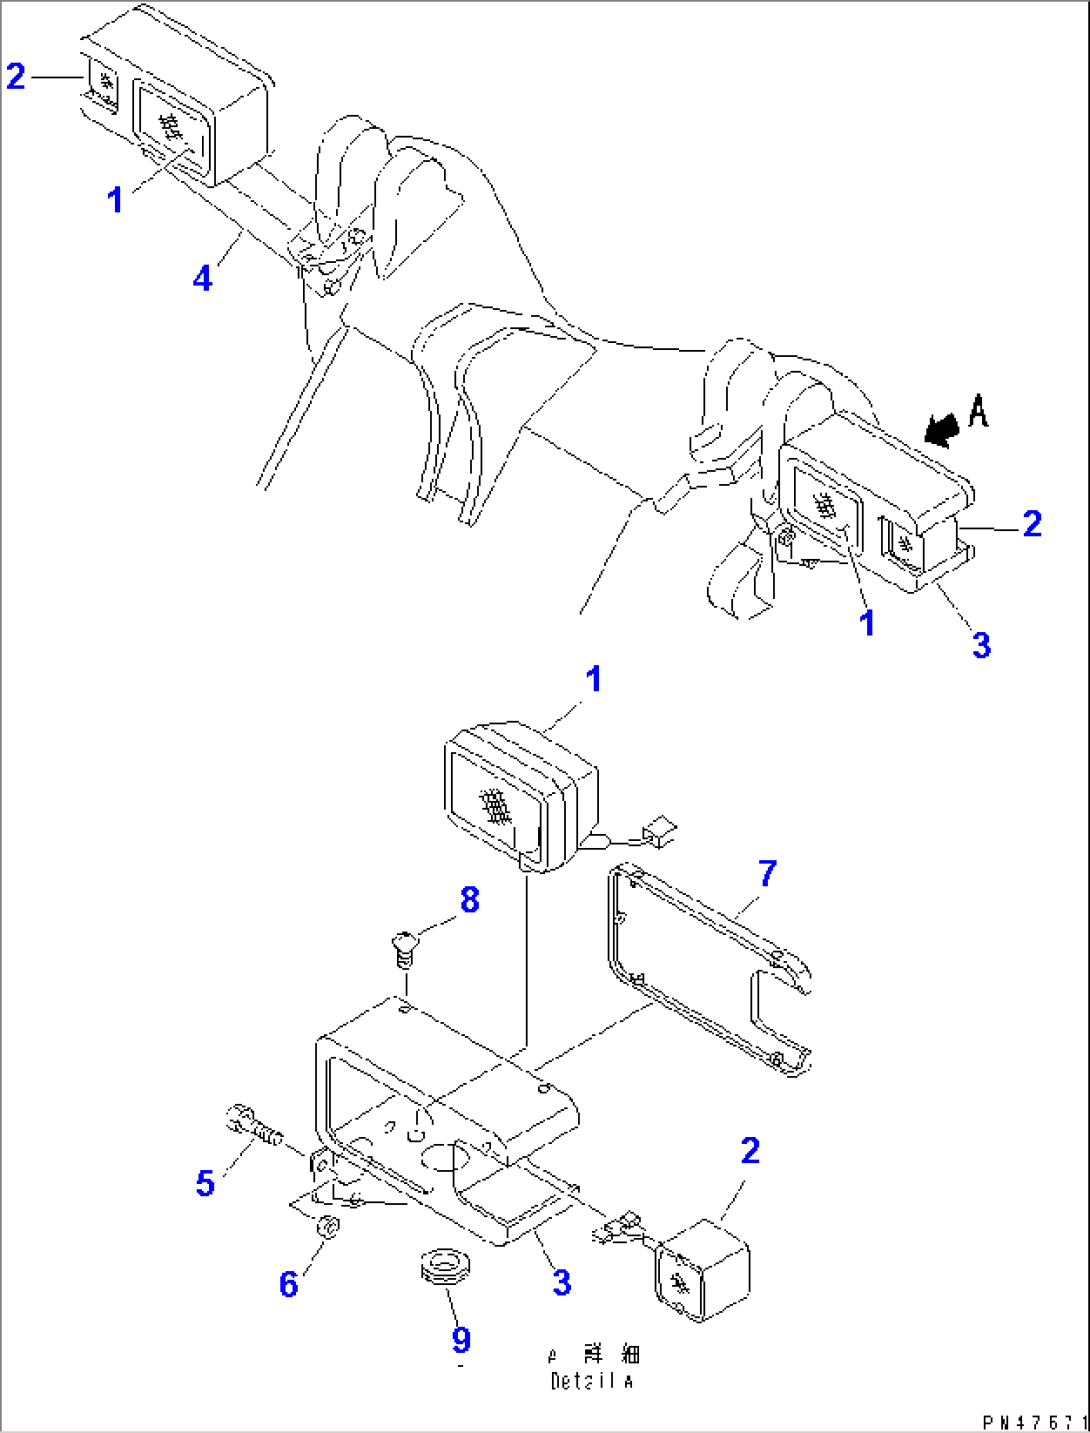 ELECTRICAL SYSTEM (FRONT LAMP)(#60001-)